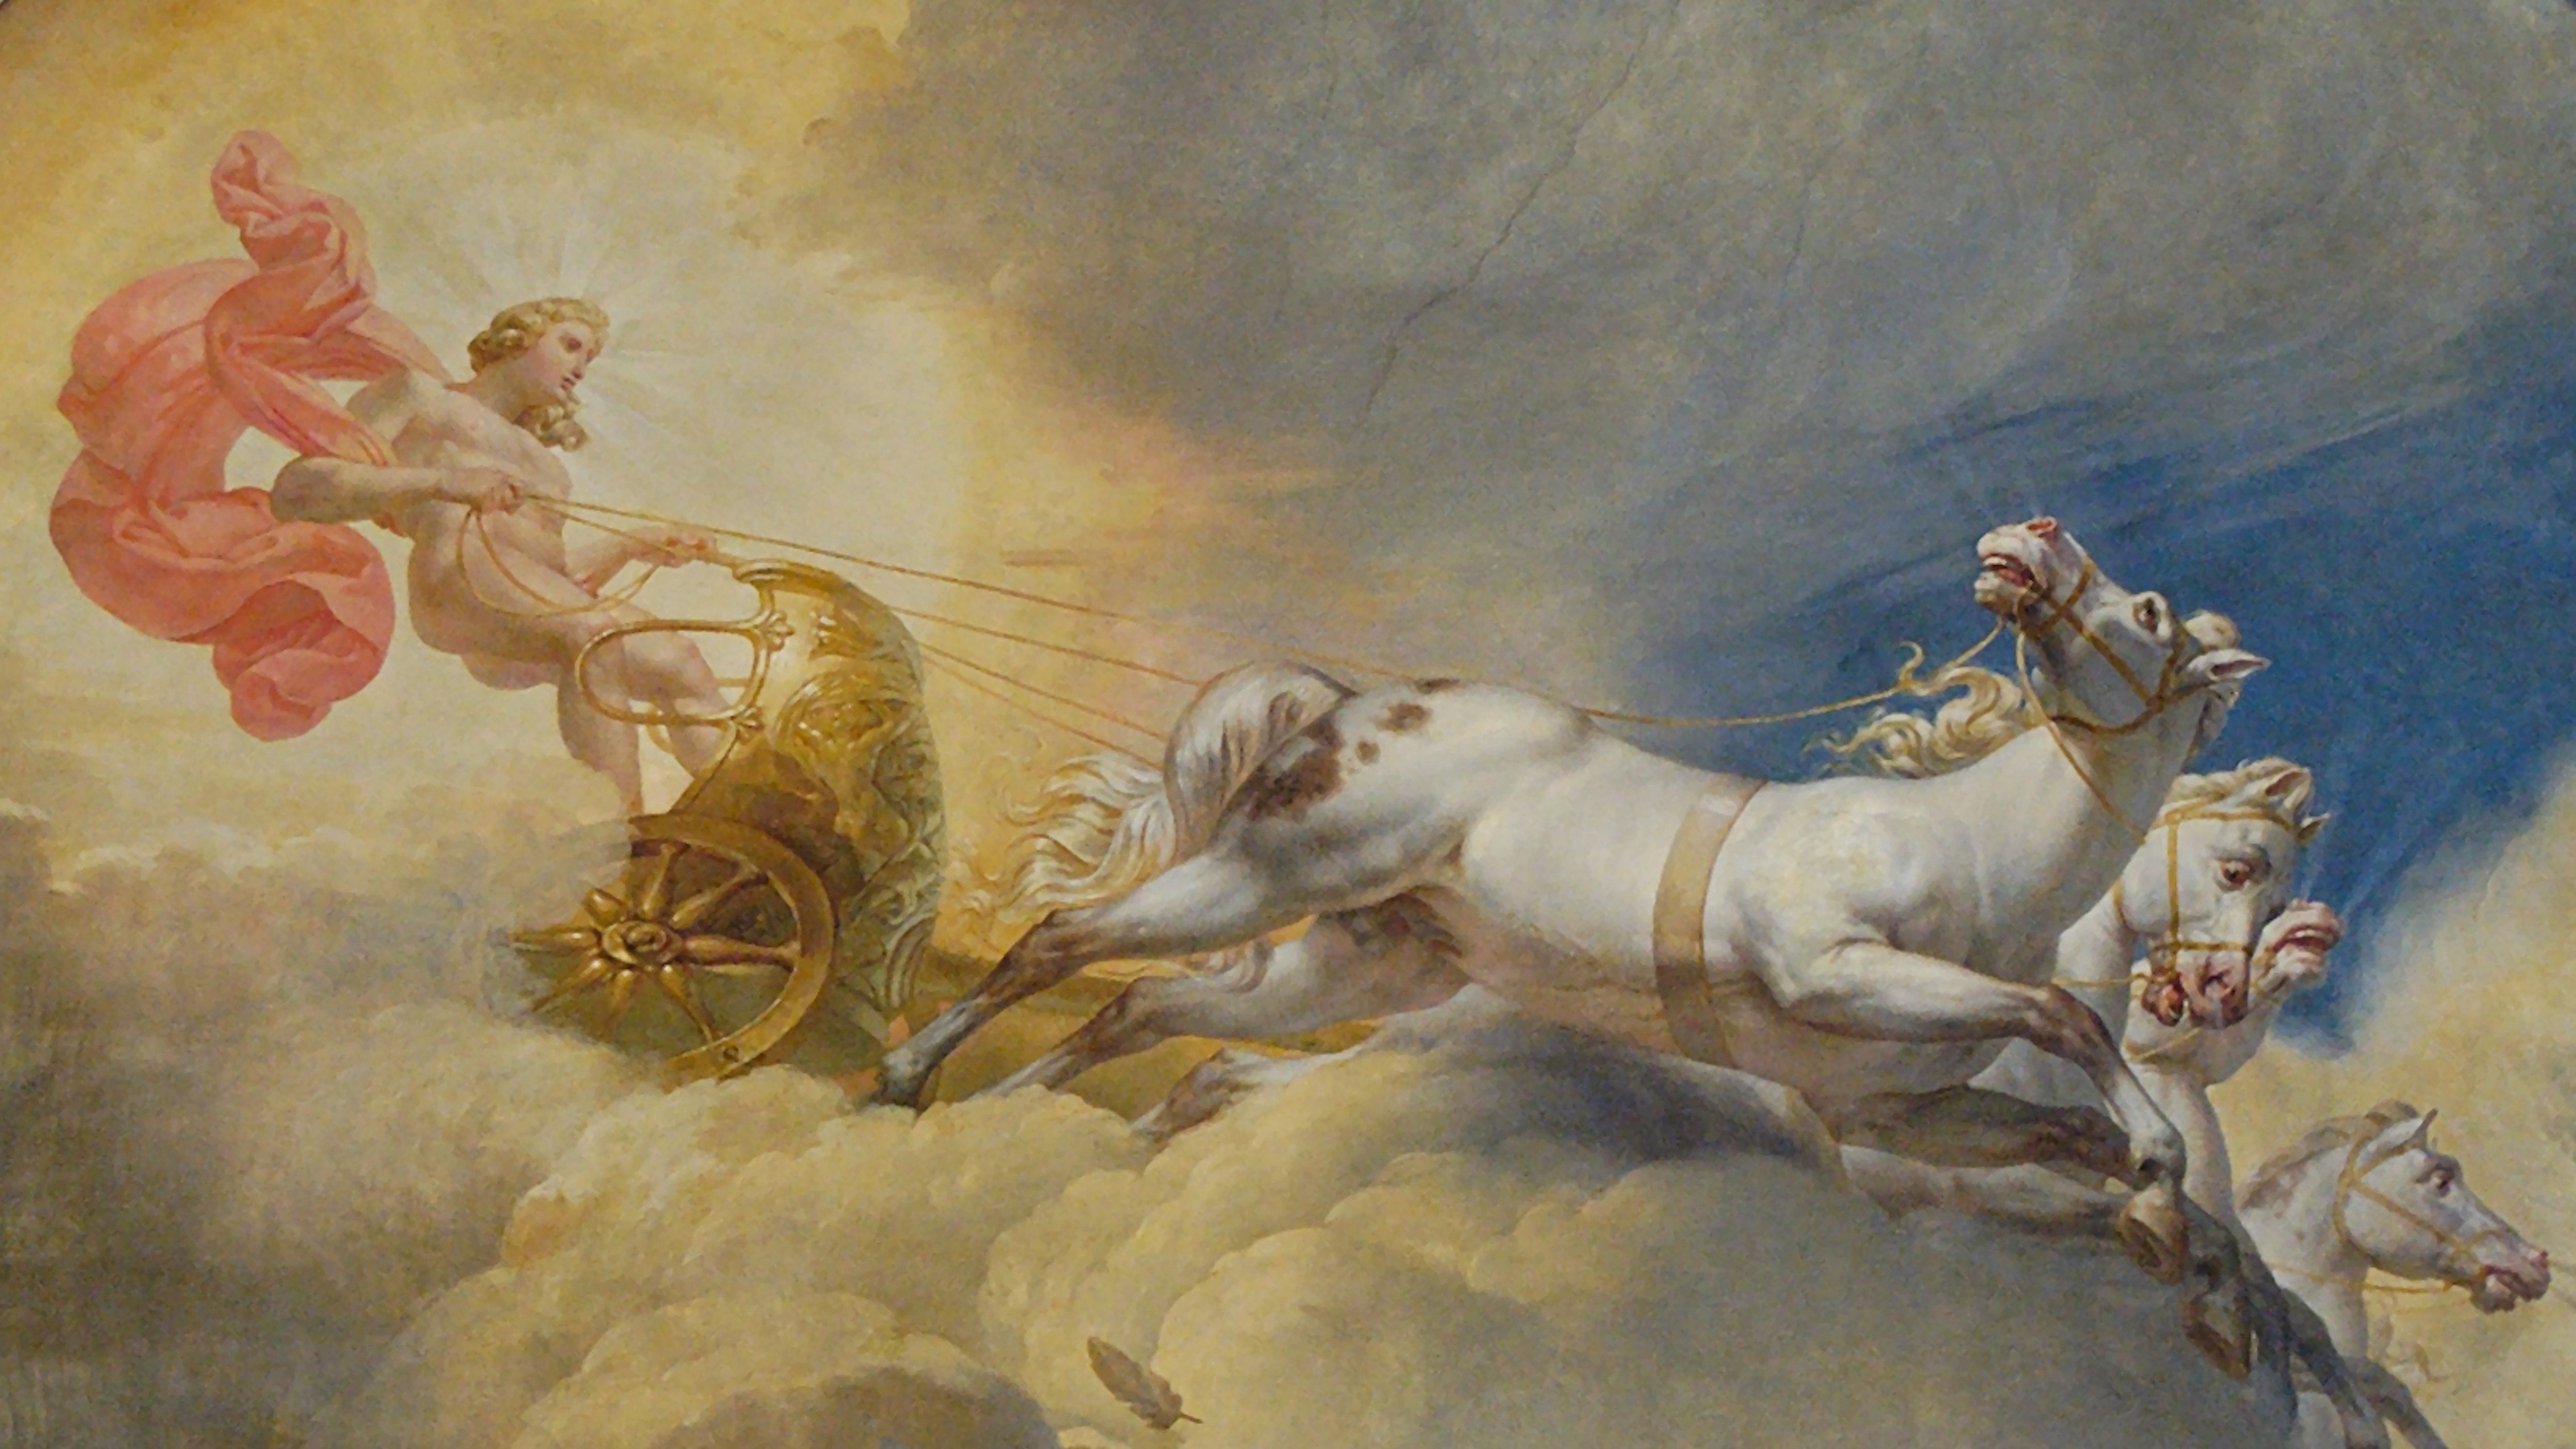 A painting of a mythological figure driving a chariot pulled by two white horses through the clouds, draped in a flowing red fabric, symbolizing executive ego.